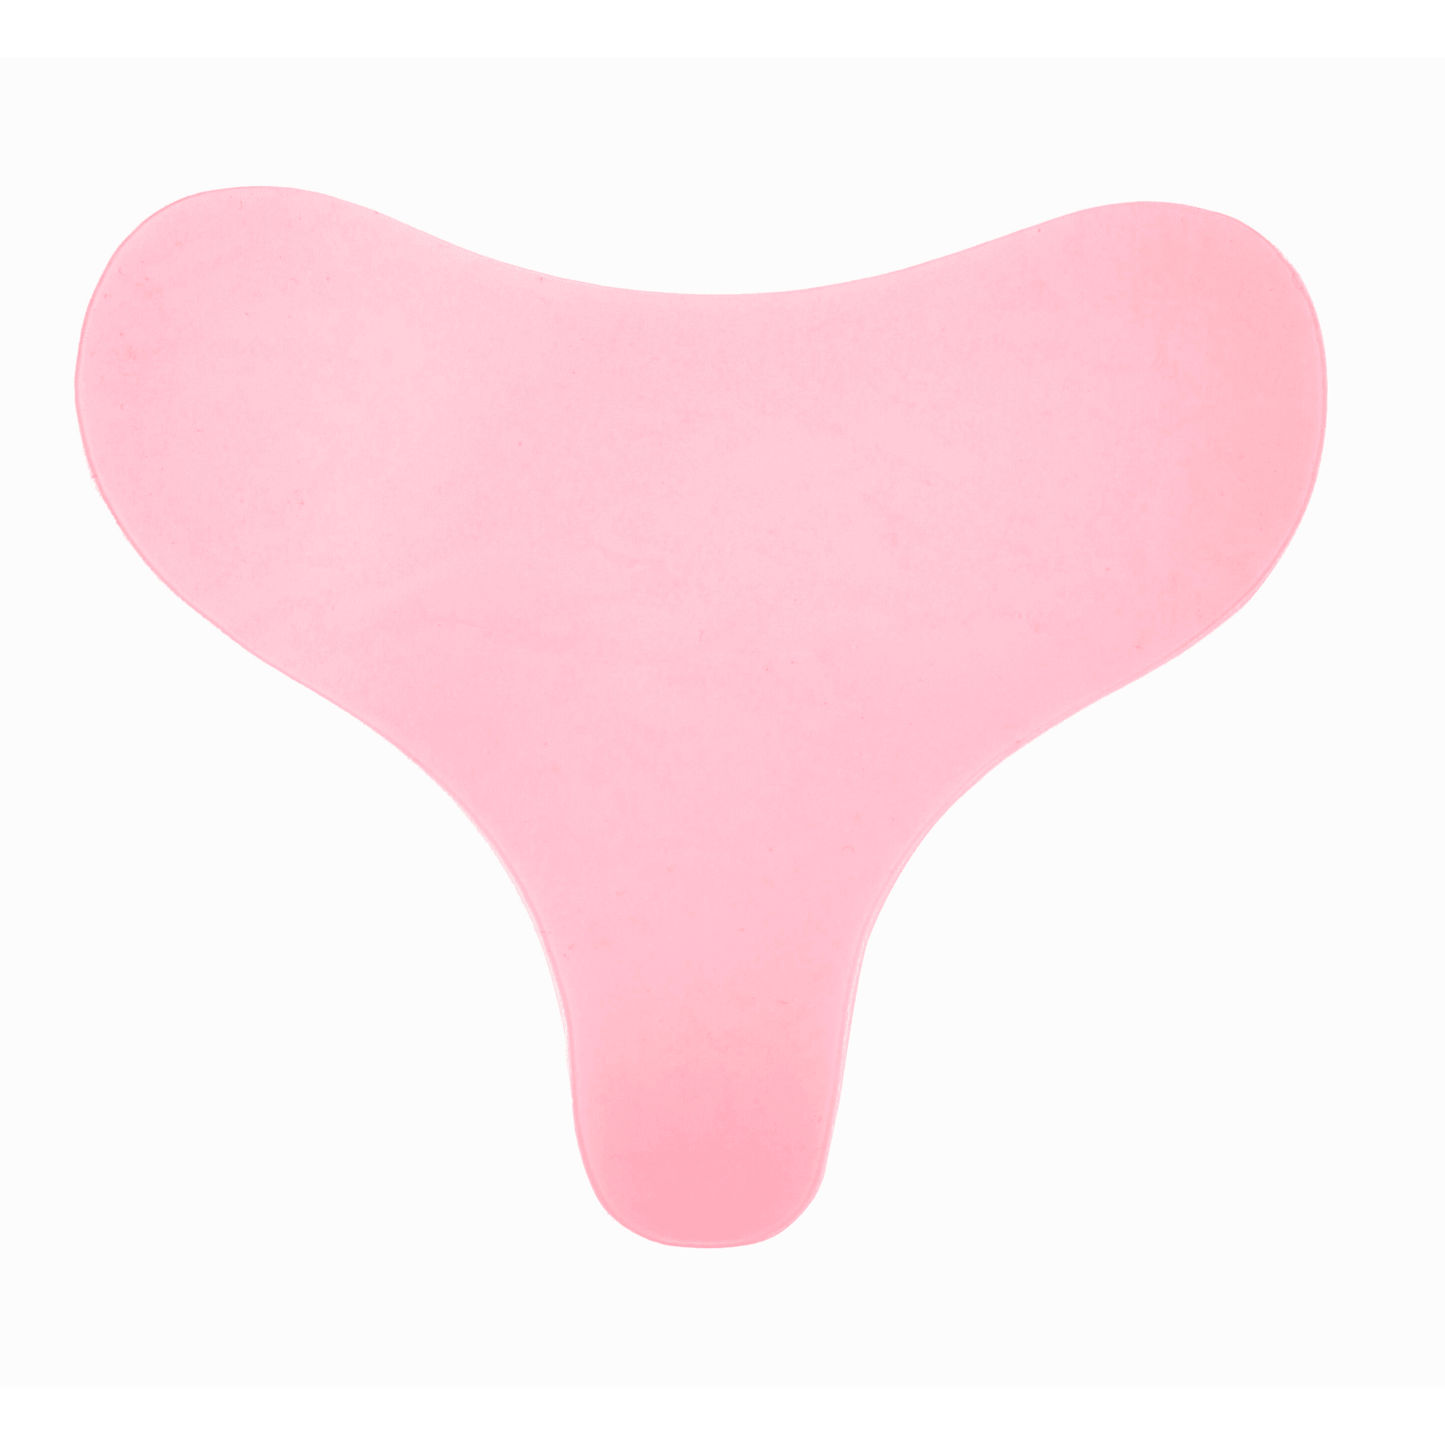 Hydrating Chest Pad [Reusable Silicone Pad] - Dreambox Beauty